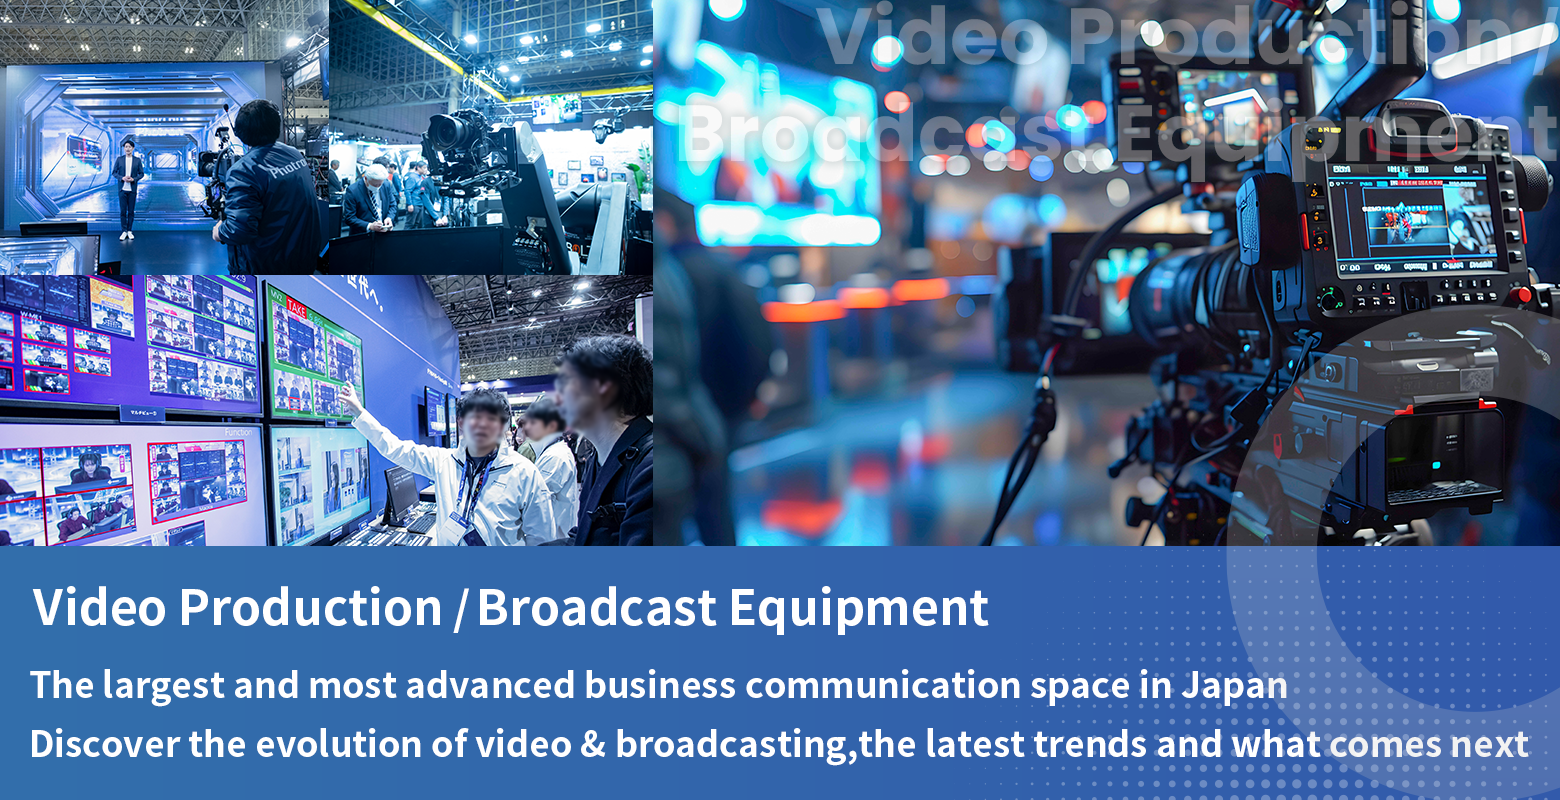 Video Production / Broadcast Equipment